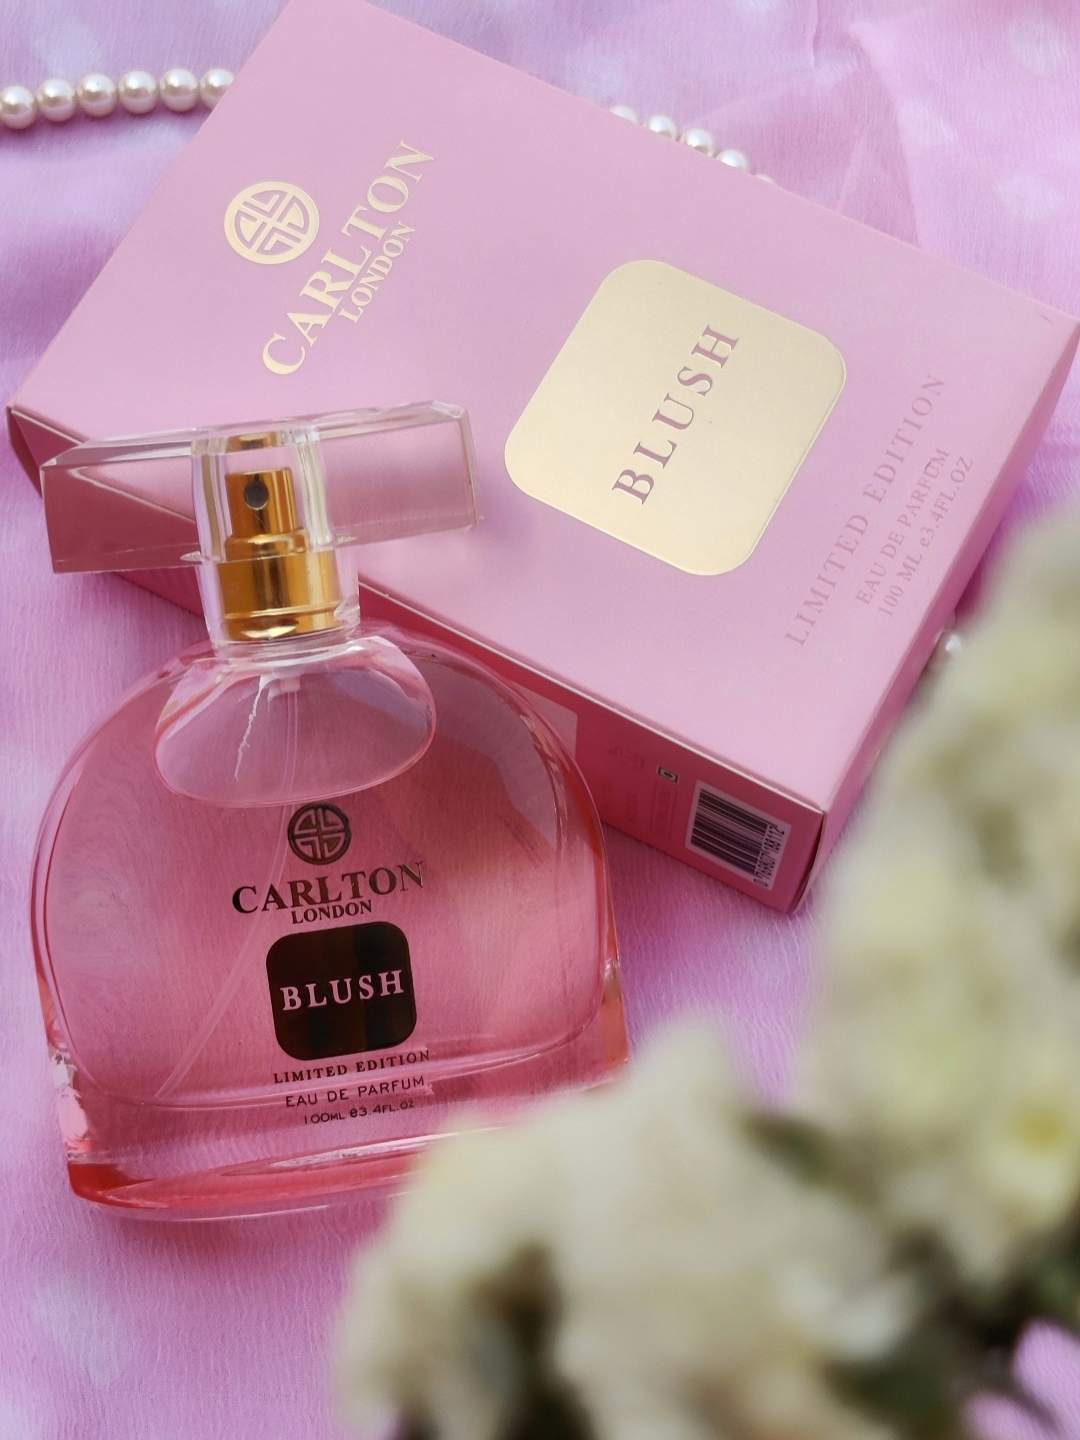 Luxury Perfumes with upto 50% off, All International Brands Available, Perfume Men and Women